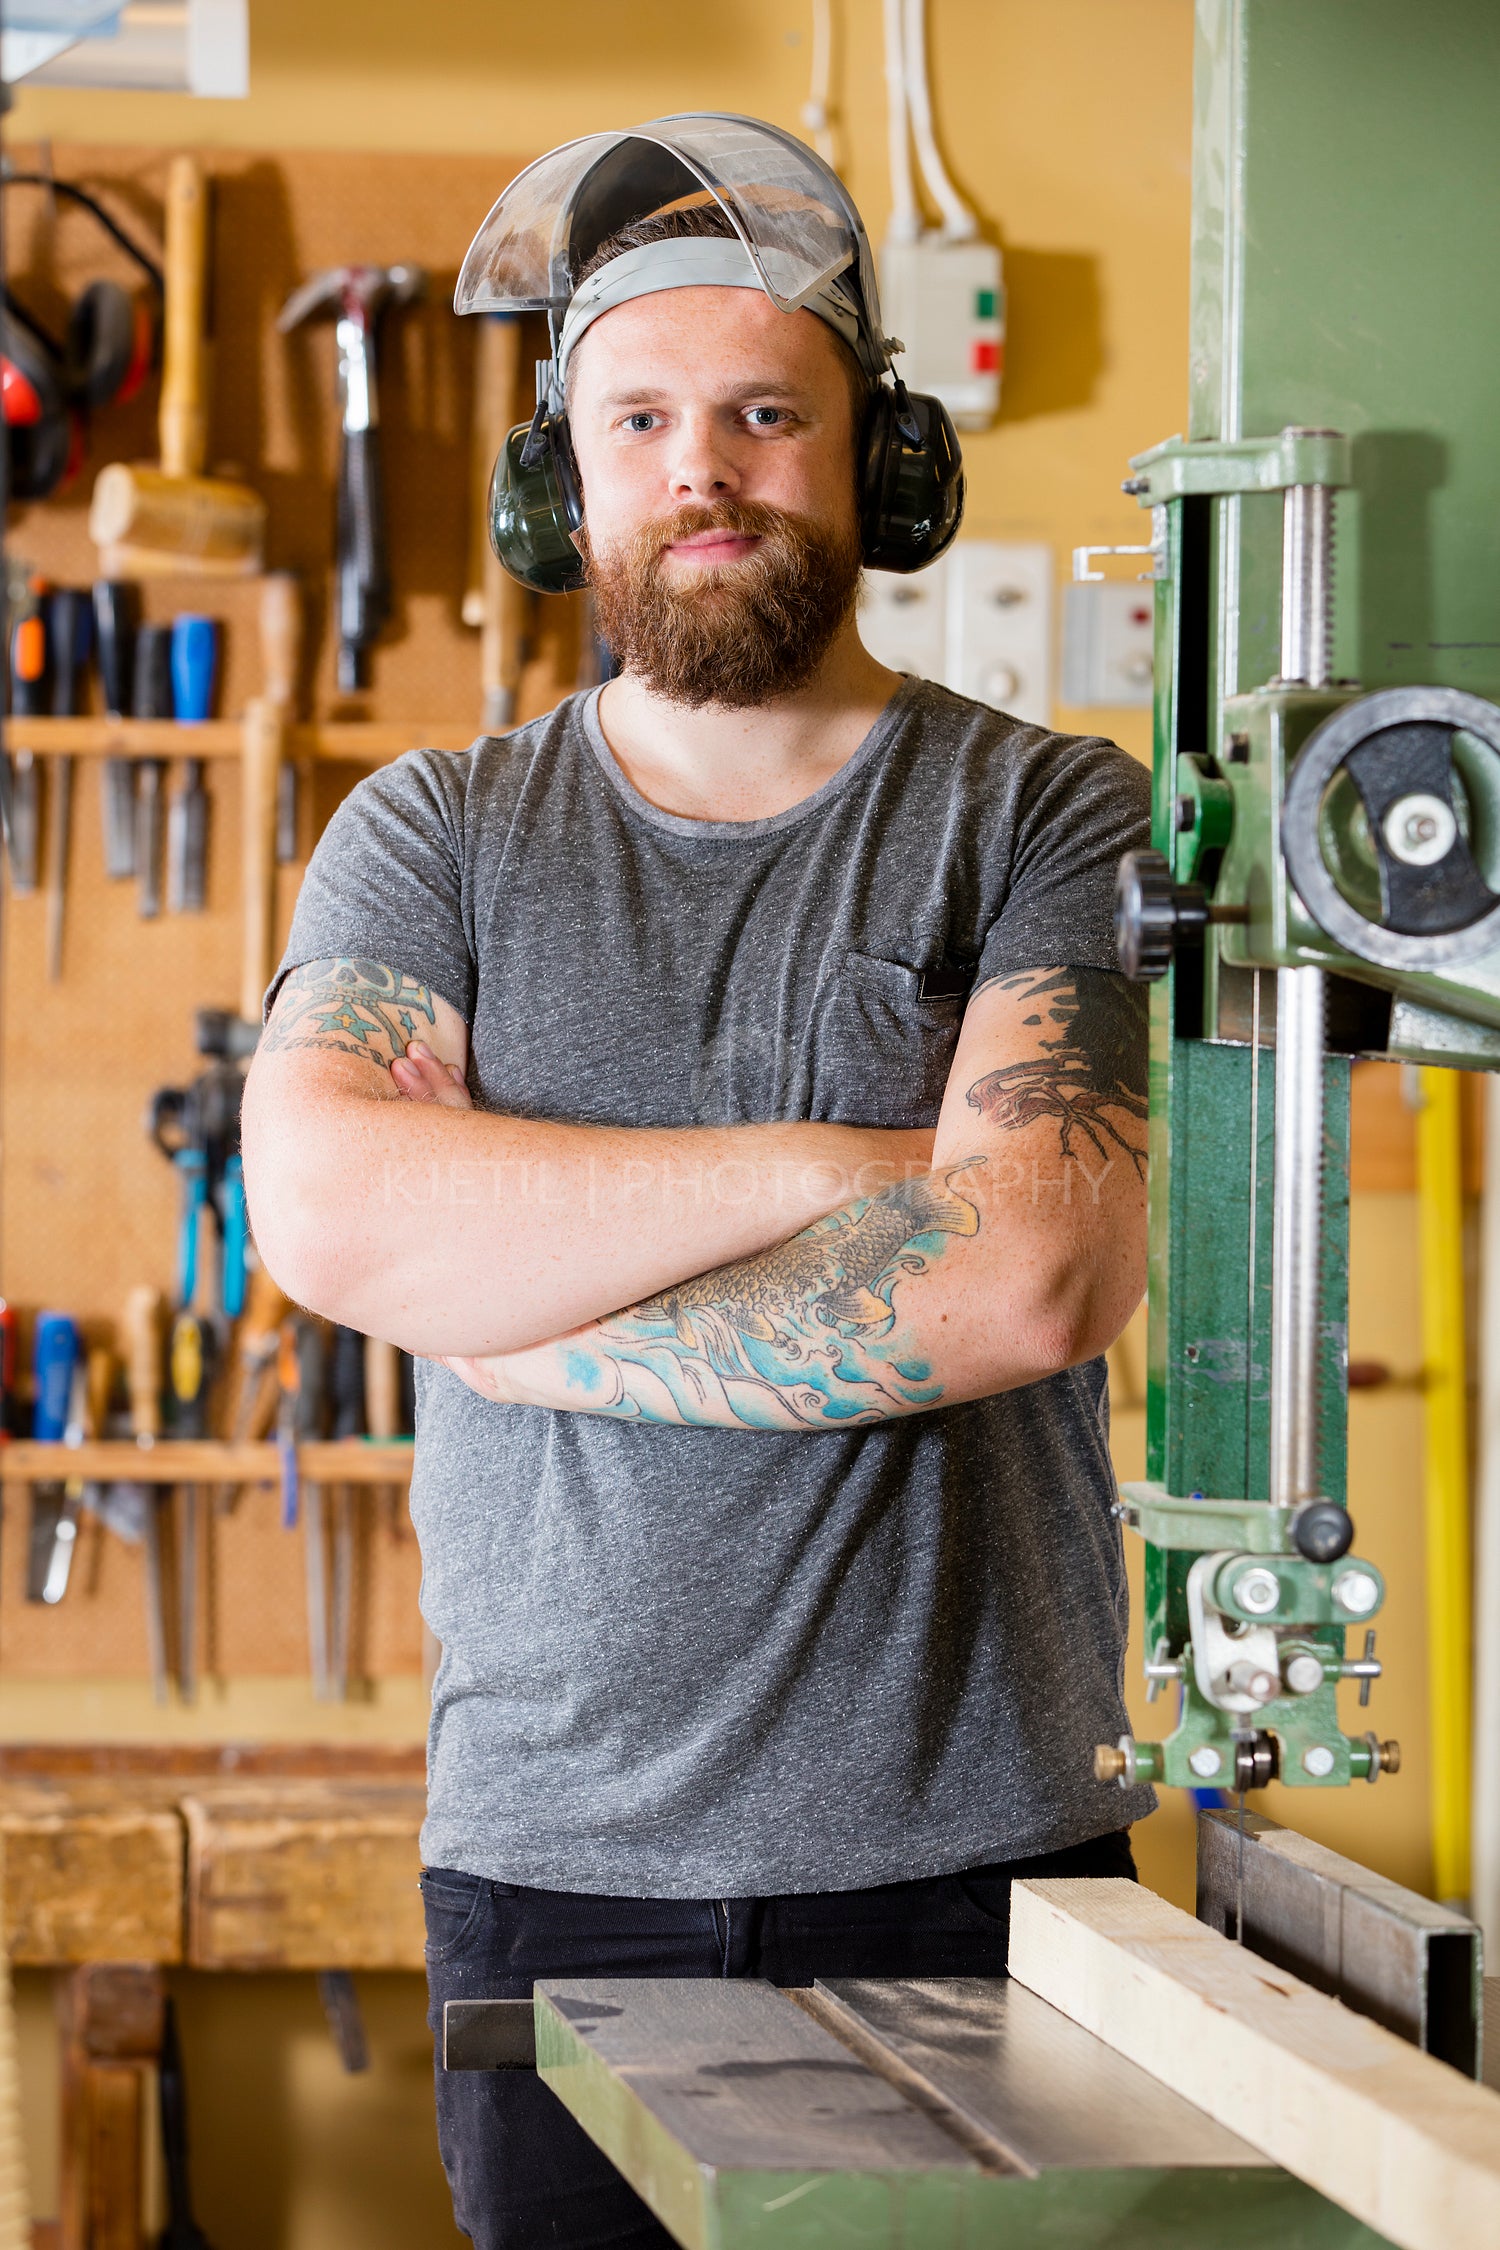 Smiling craftsman with safety mask and earmuffs in workshop